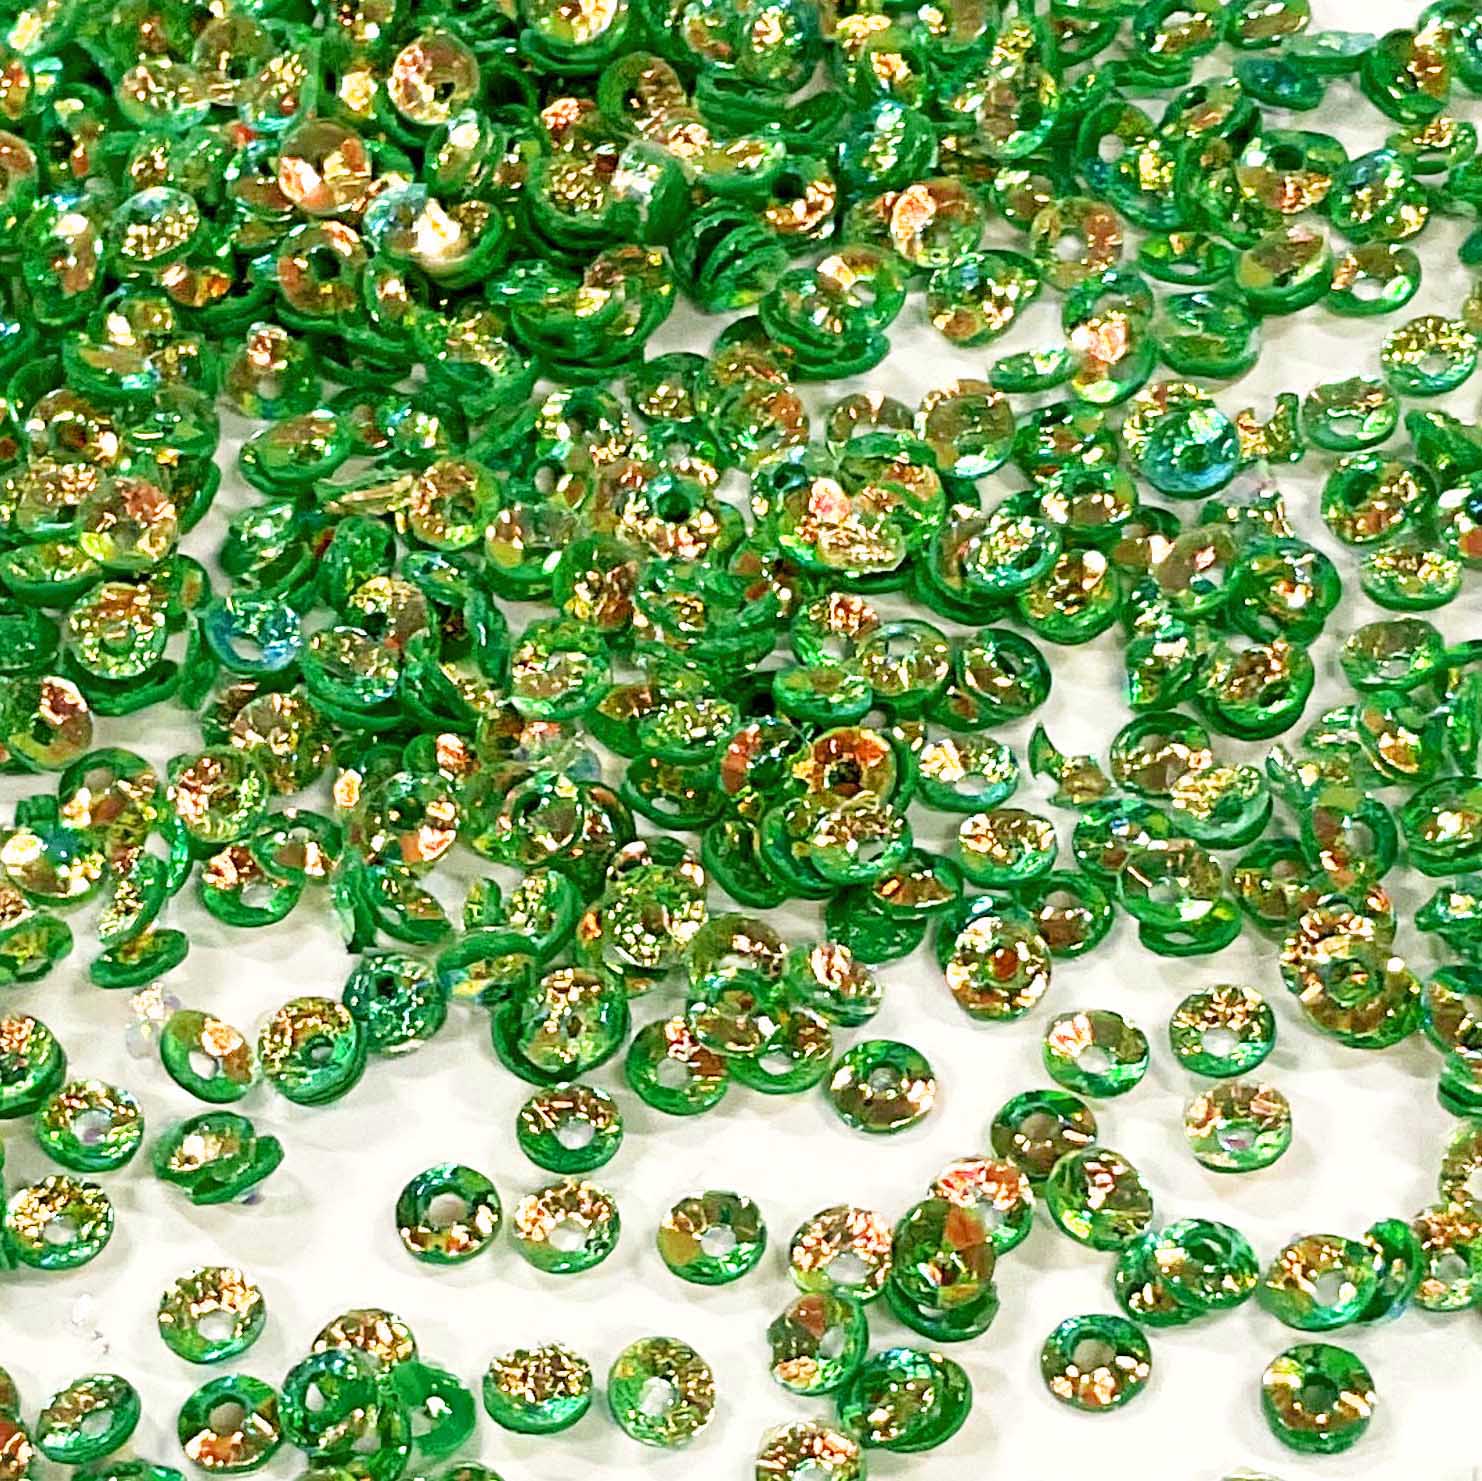 www.colourstreams.com.au Colour Streams Sequins Embellishments Costumes Mardi Gras Dancing Ballet Theatre Shows Drag Queen Bling S110 Cup Circle Shape Bright Green Gold Red Lights Iridescent Greens Golds Reflective Shiny 3mm